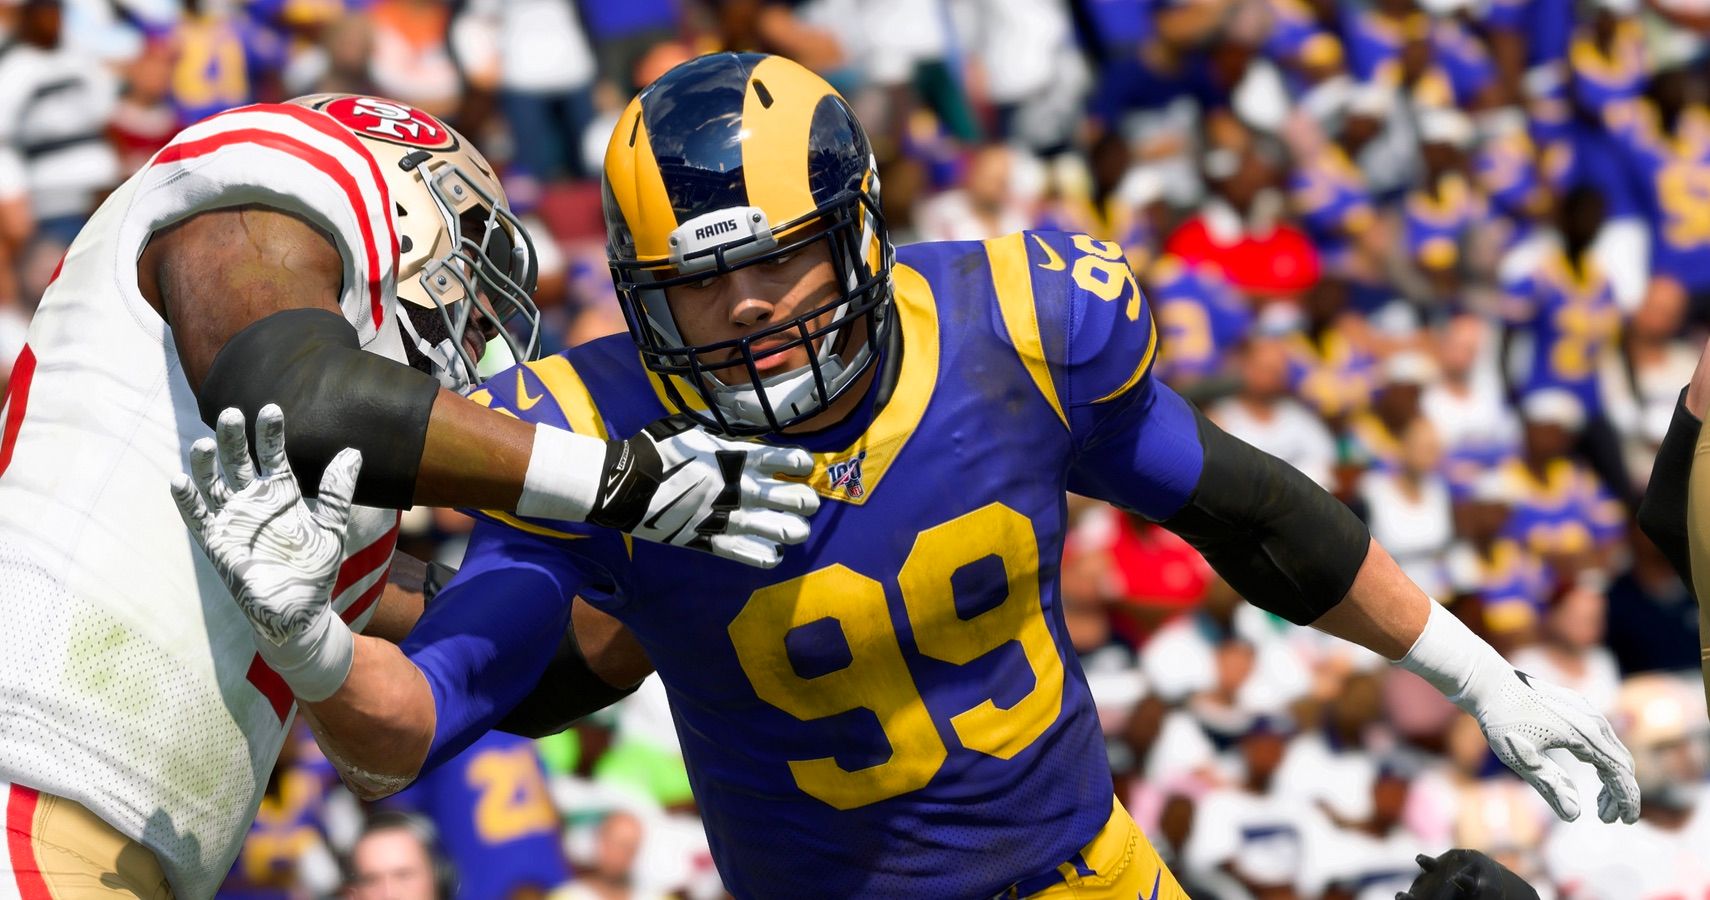 Madden NFL 20 Steeply Discounted Prior To Super Bowl LIV